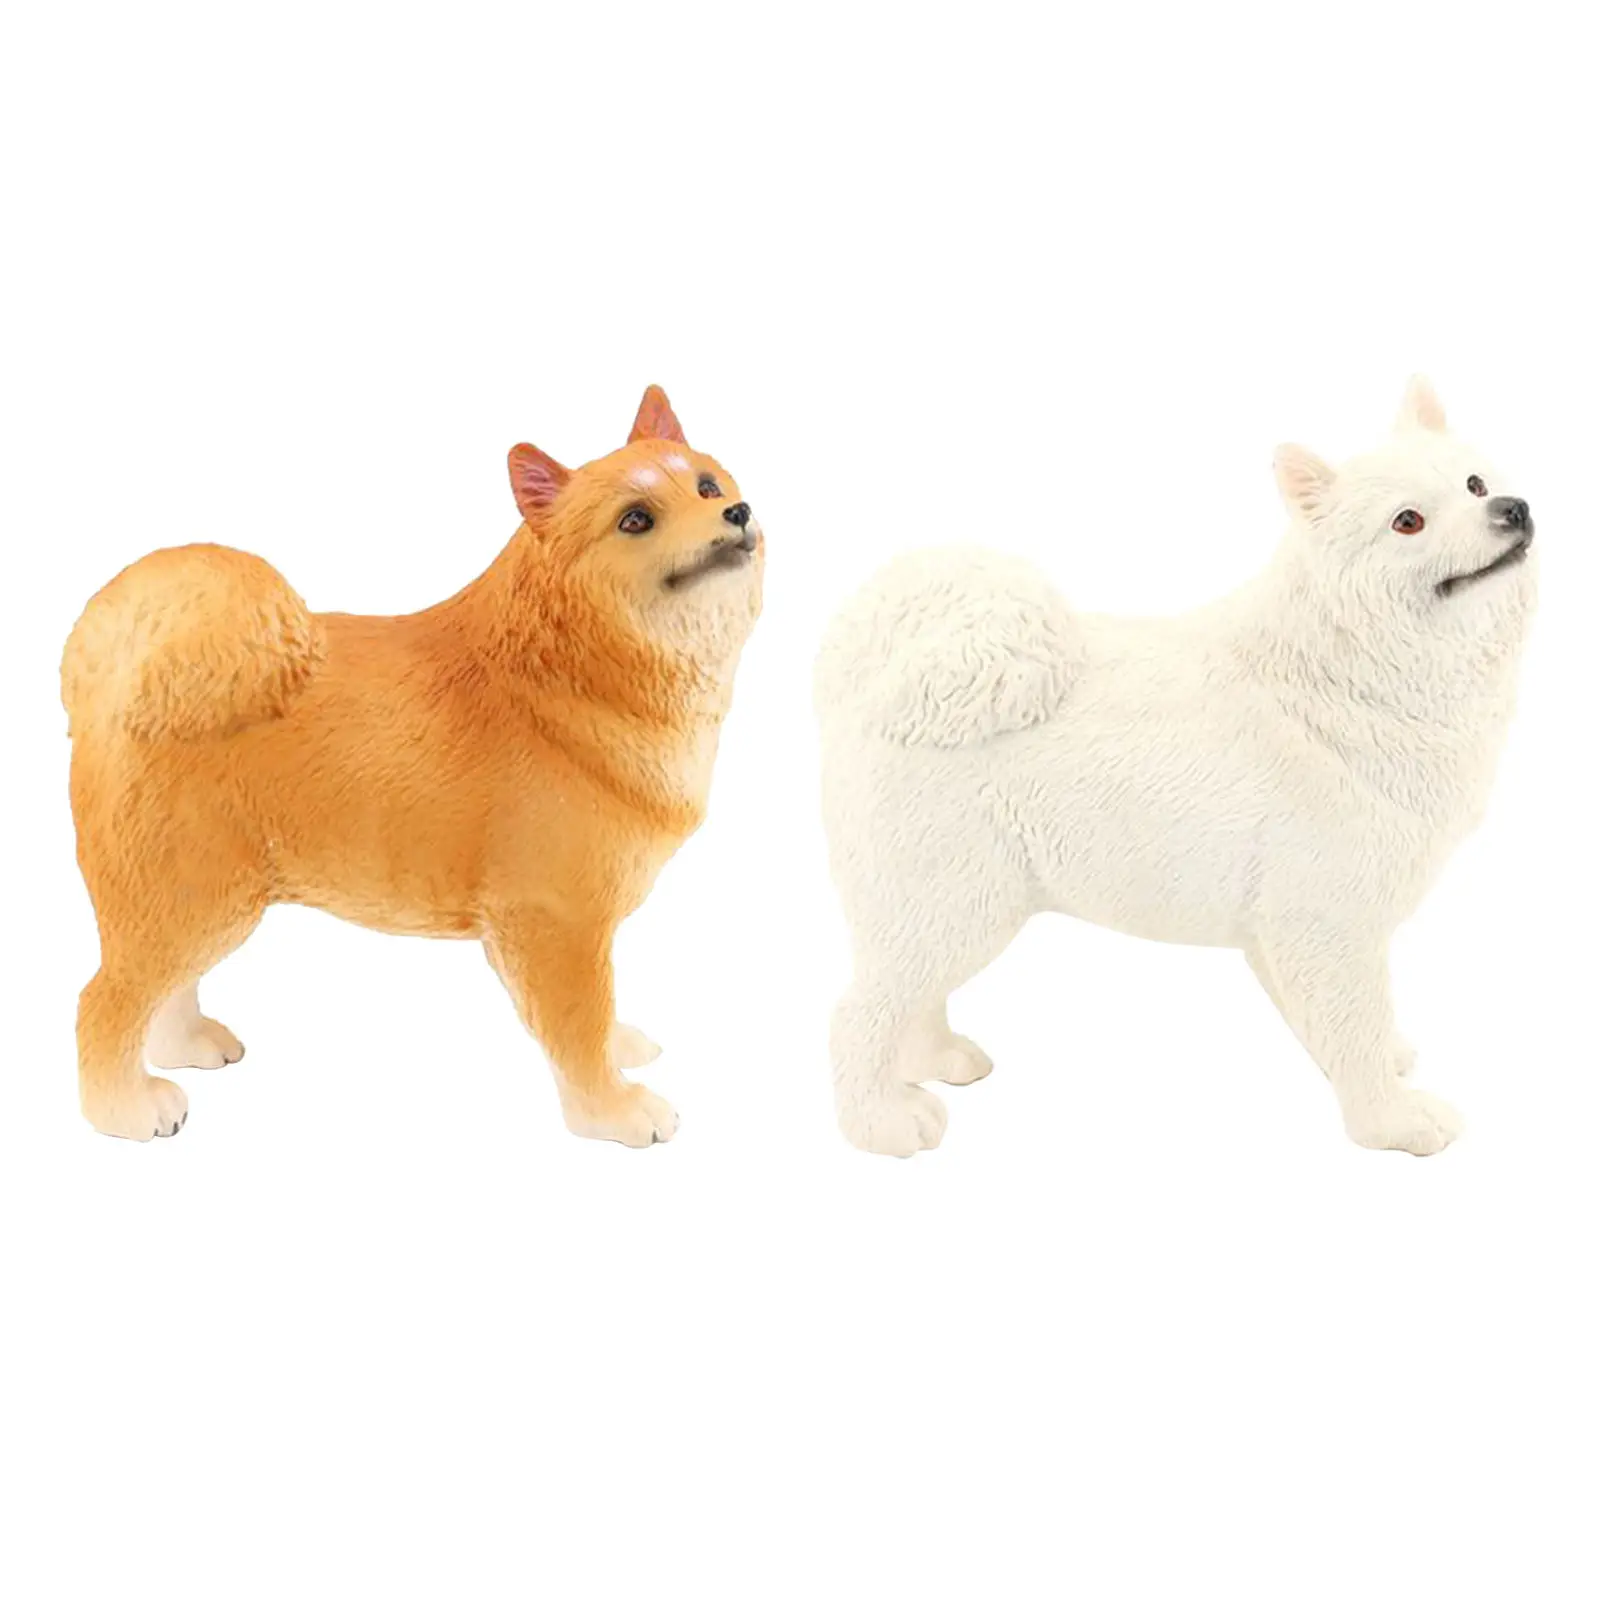 

Simulation Samoyed Model Miniature Educational Dog Figurines Action Figures Toy for Christmas Present Holiday Gift Ages 6 and up